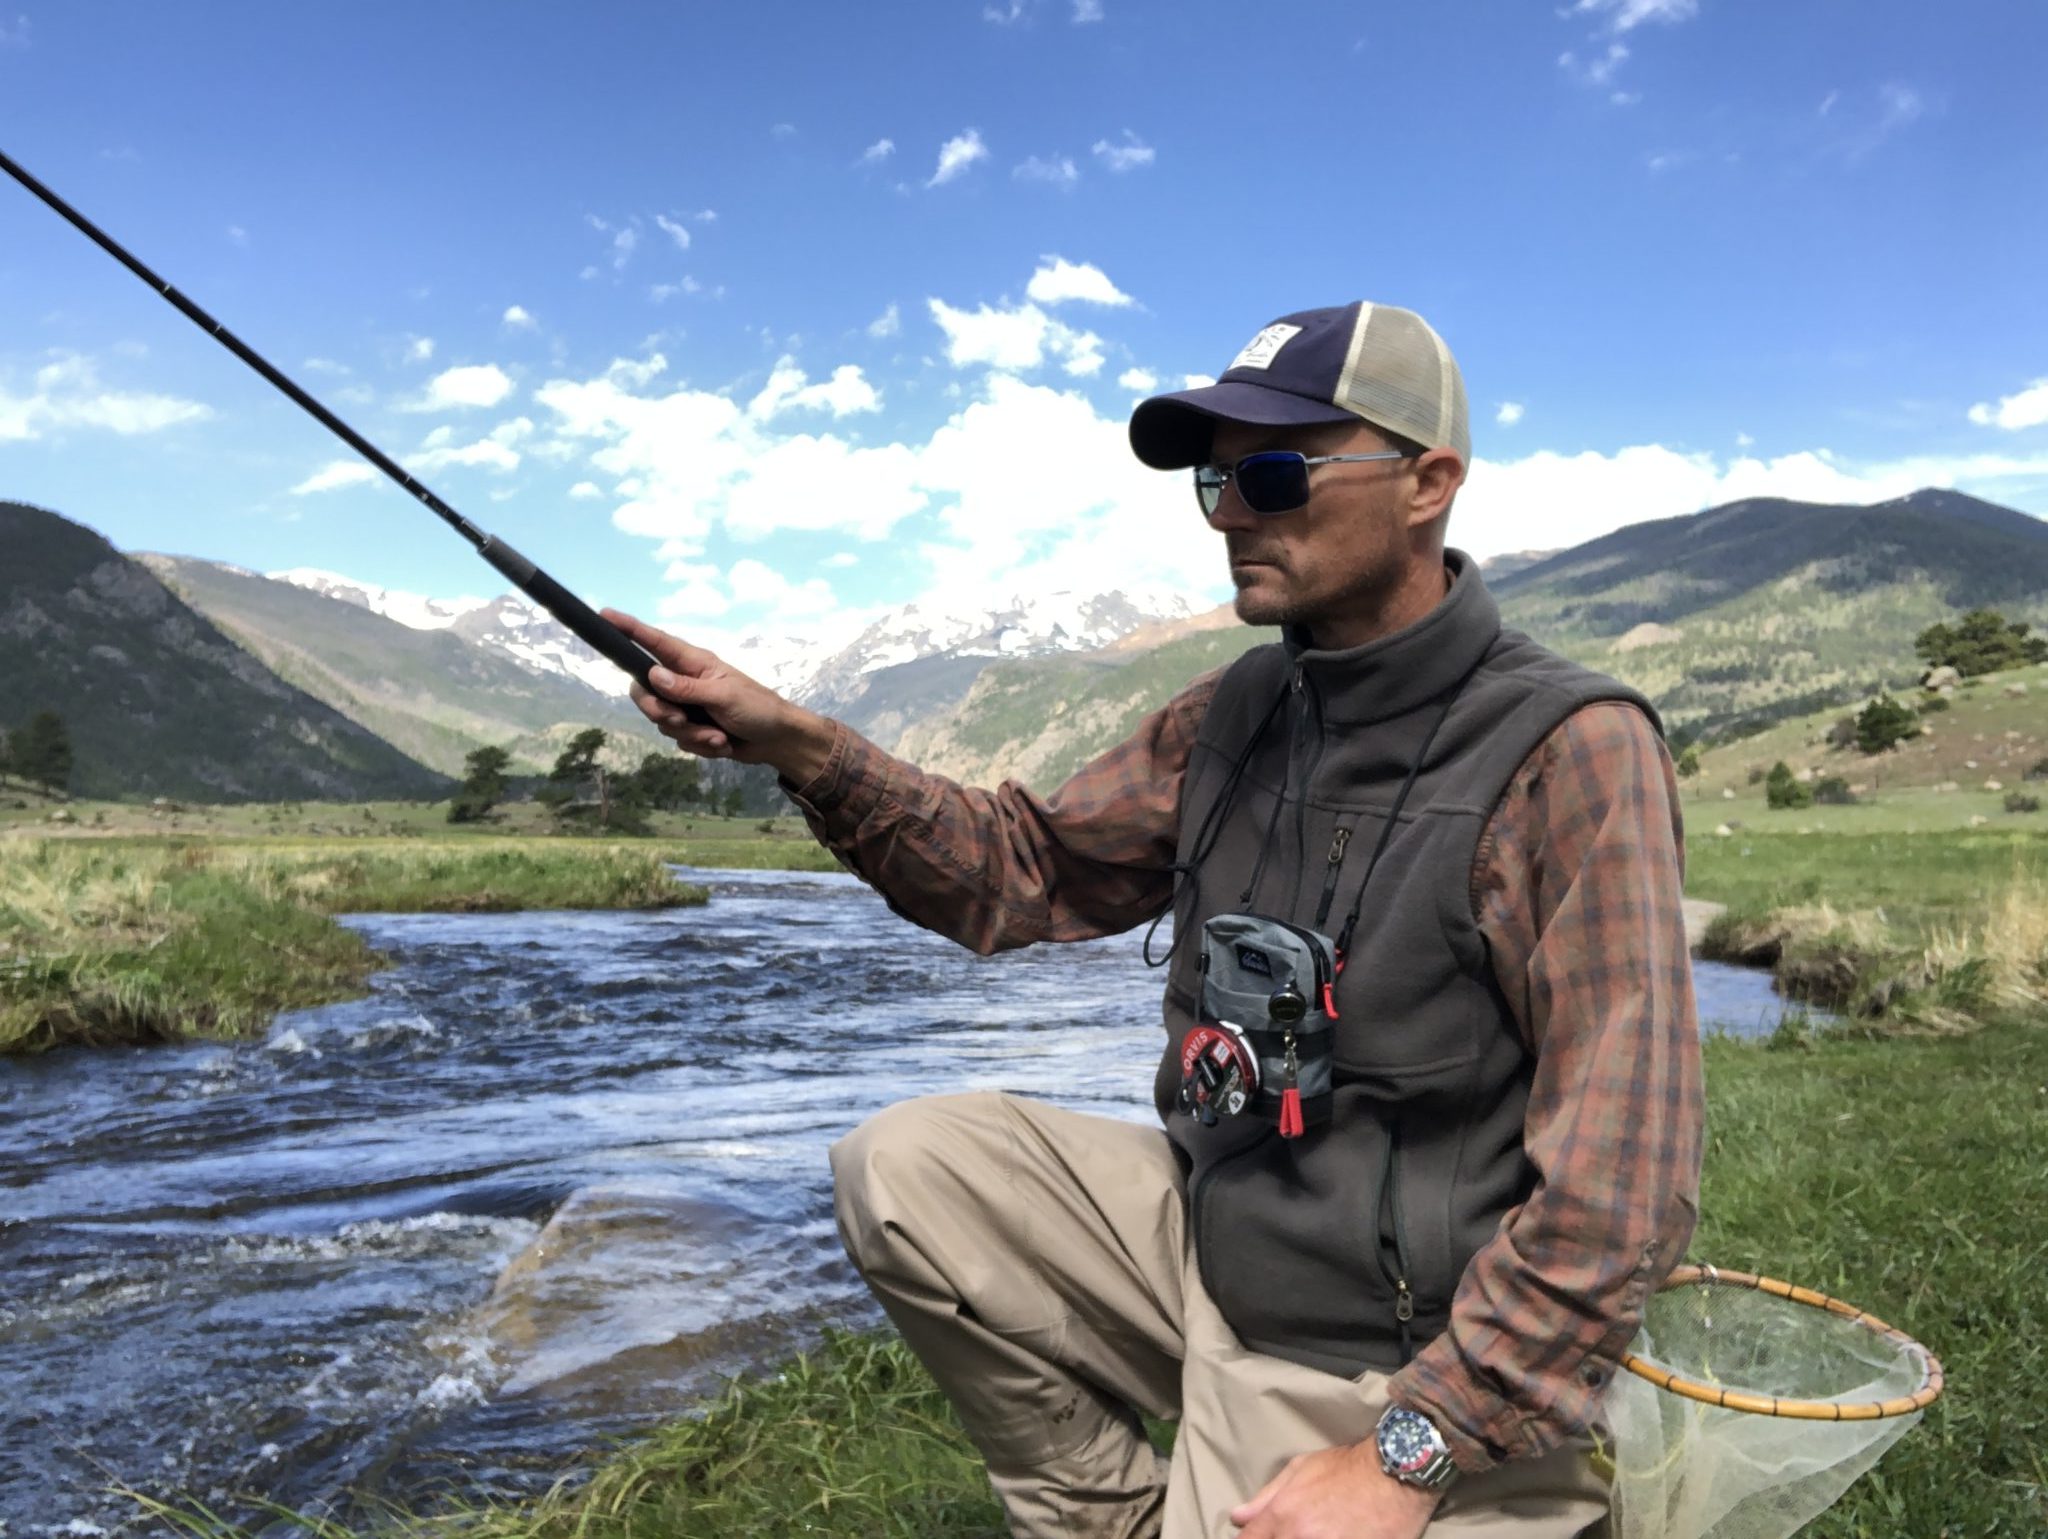 Patagonia Fishing Shirts – Everything you Need to Know
